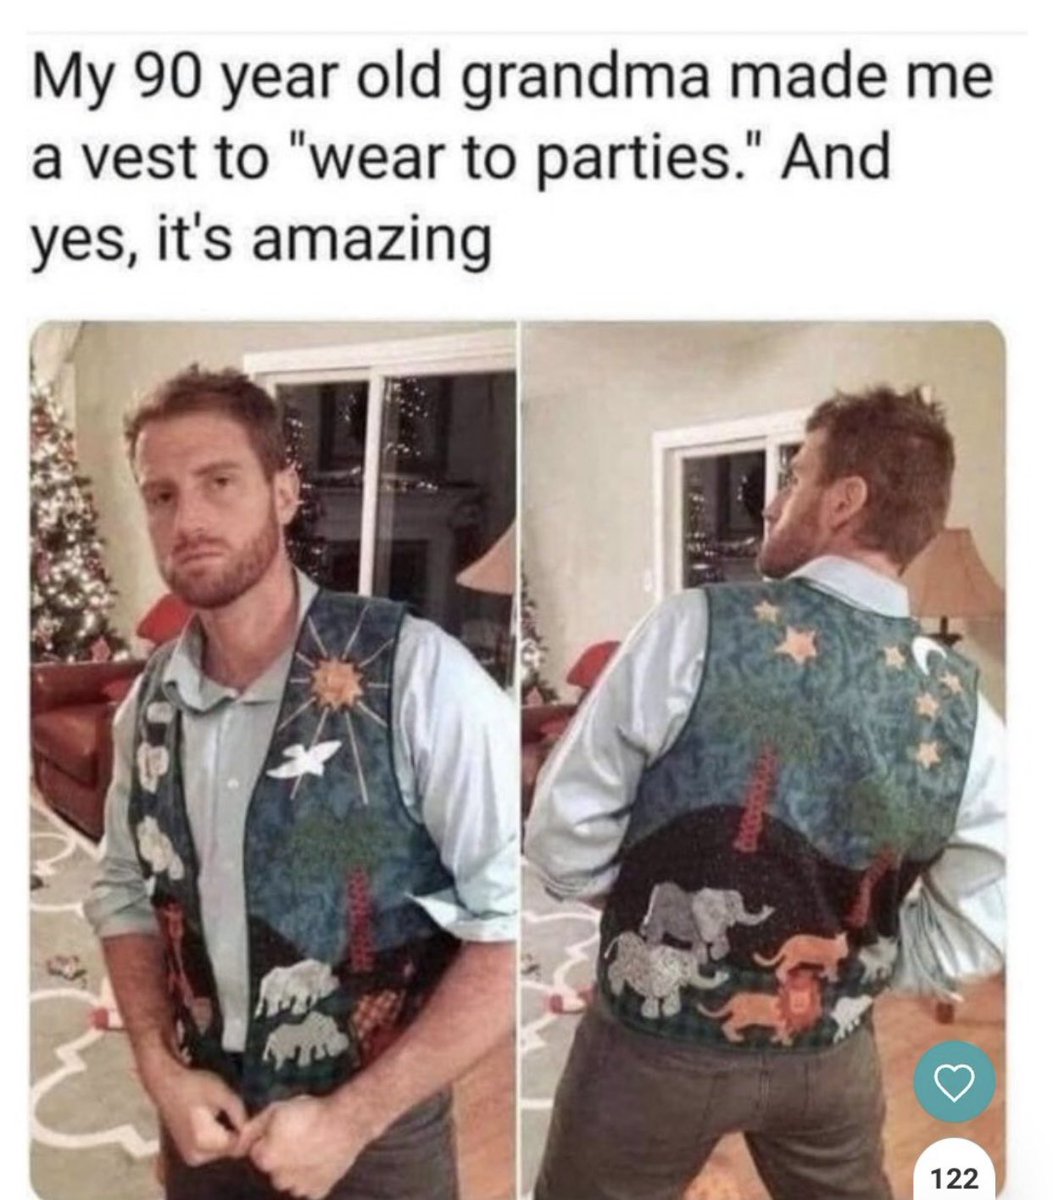 dudes posting their w's - Photograph - My 90 year old grandma made me a vest to "wear to parties." And yes, it's amazing 122